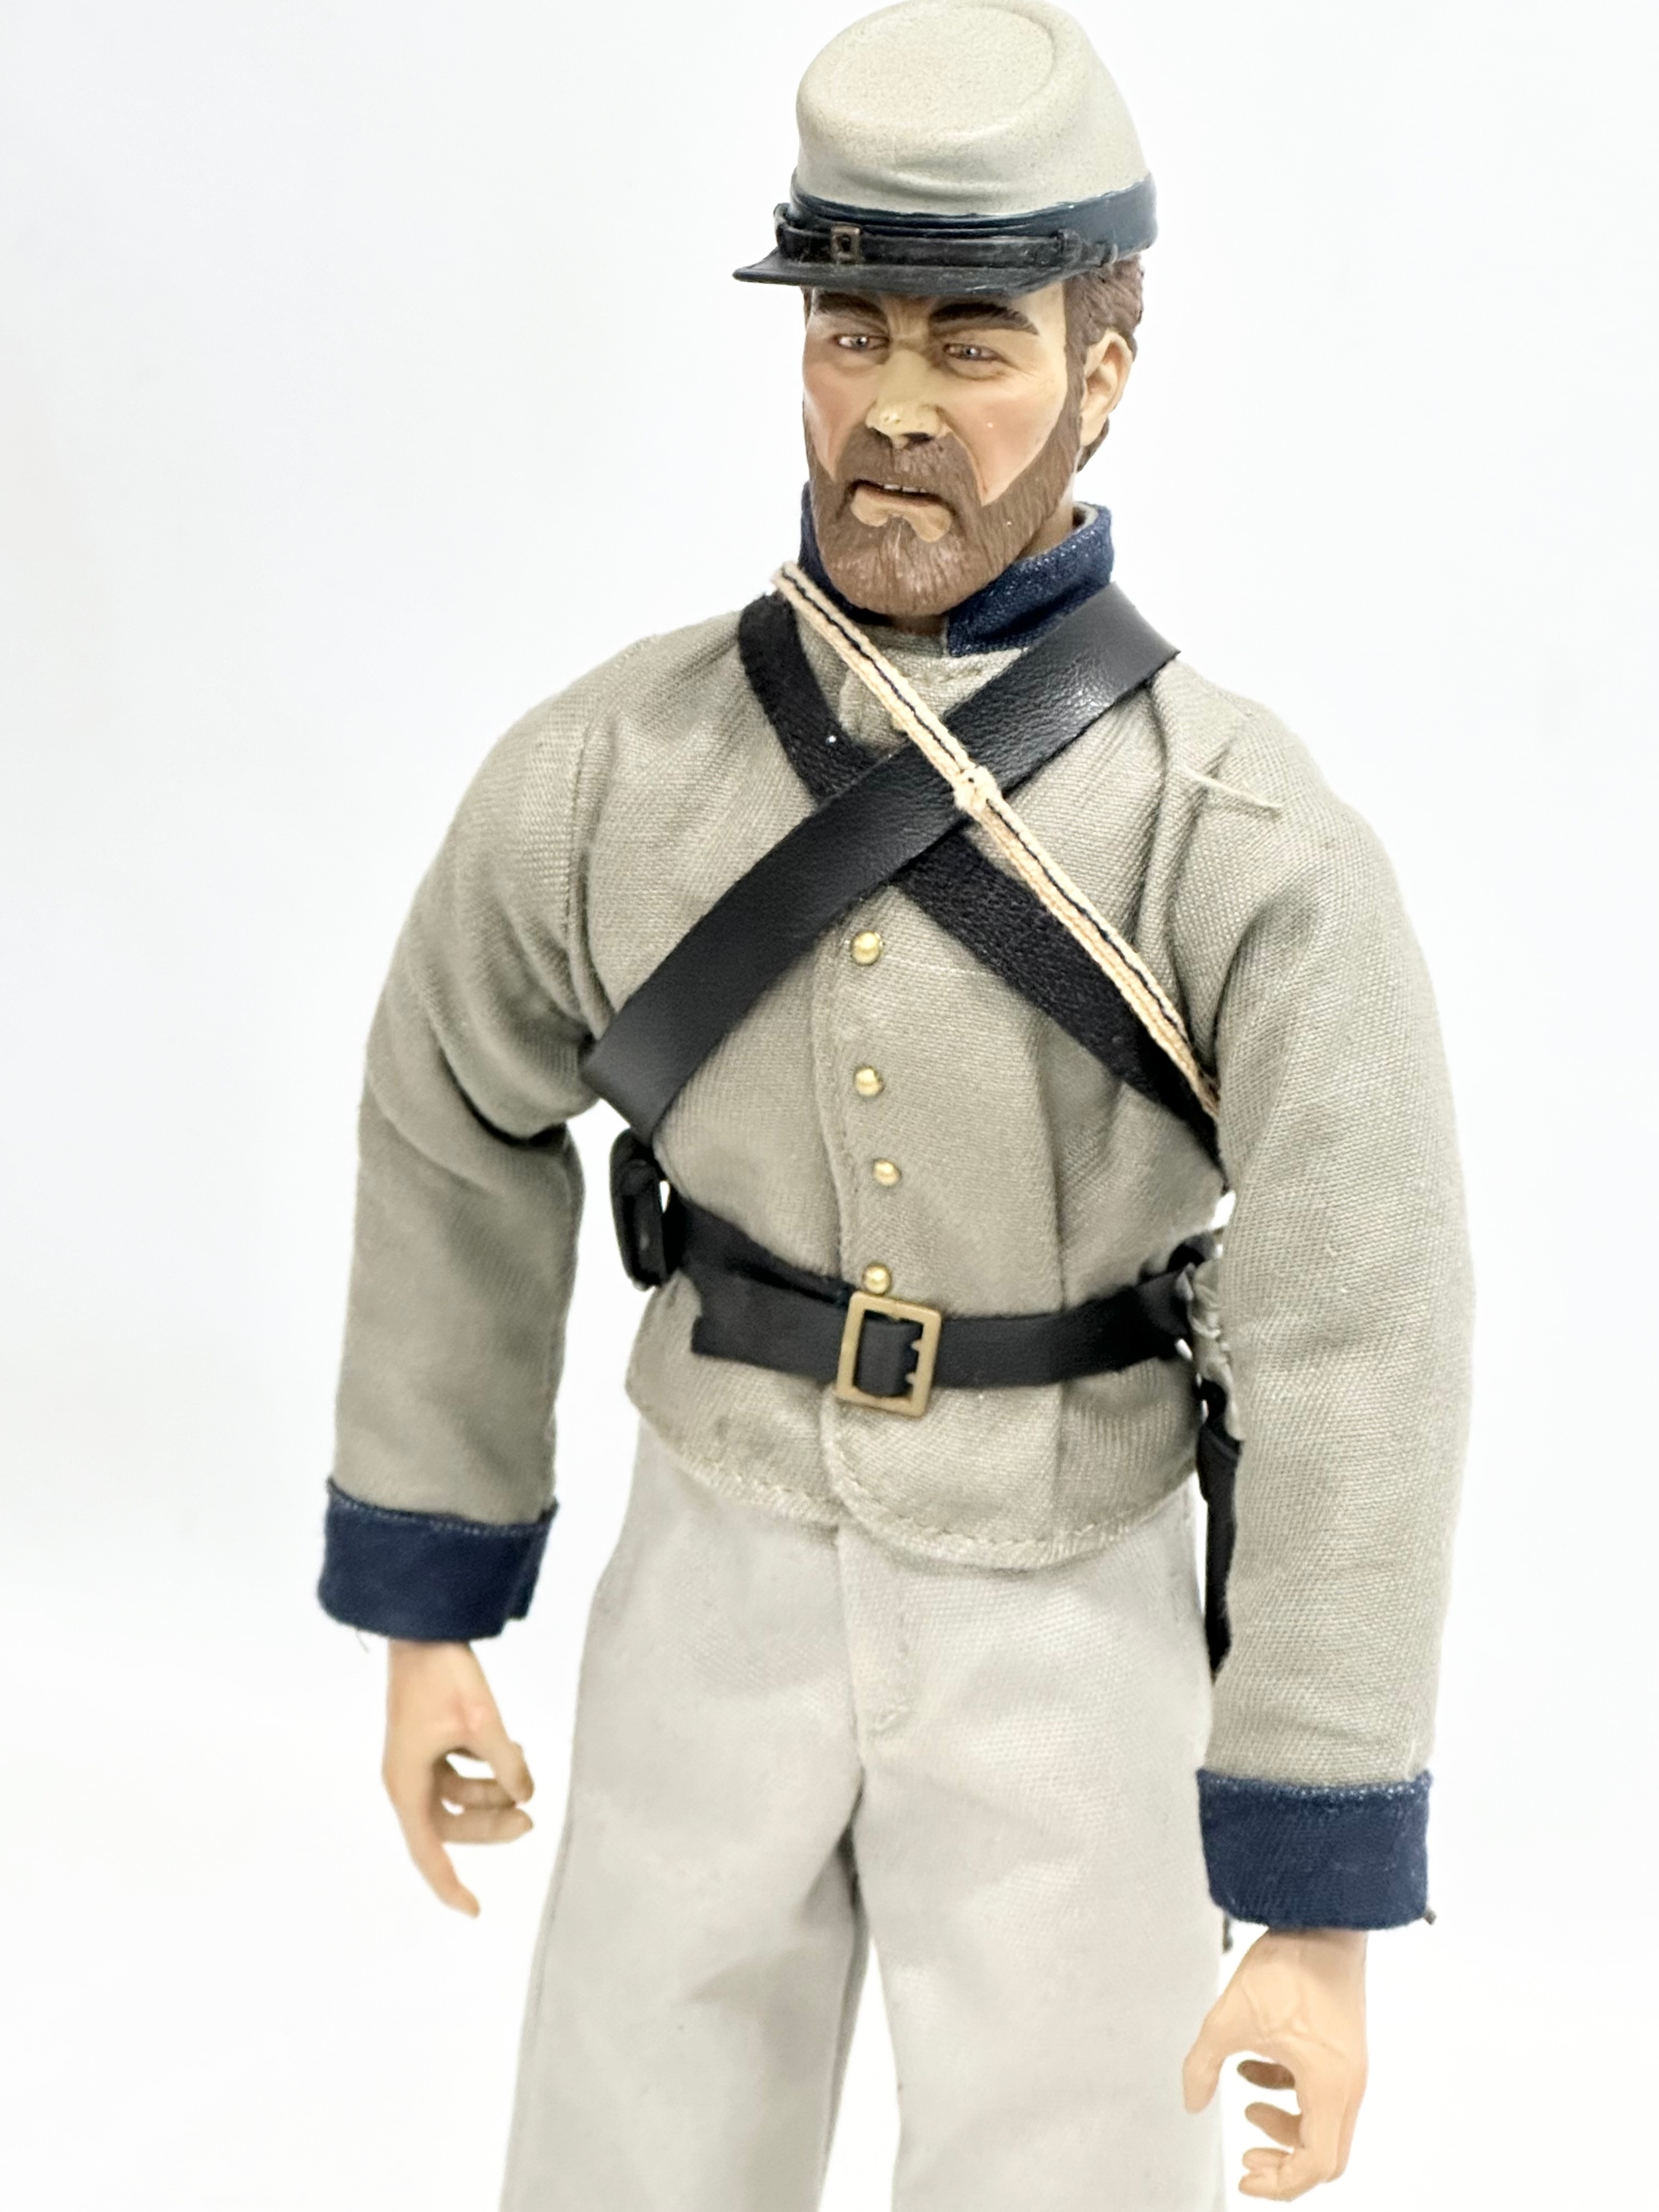 A Sideshow Toys American Civil War Brotherhood of Arms Confederate Infantry Action Figure. 32.5cm - Image 4 of 5